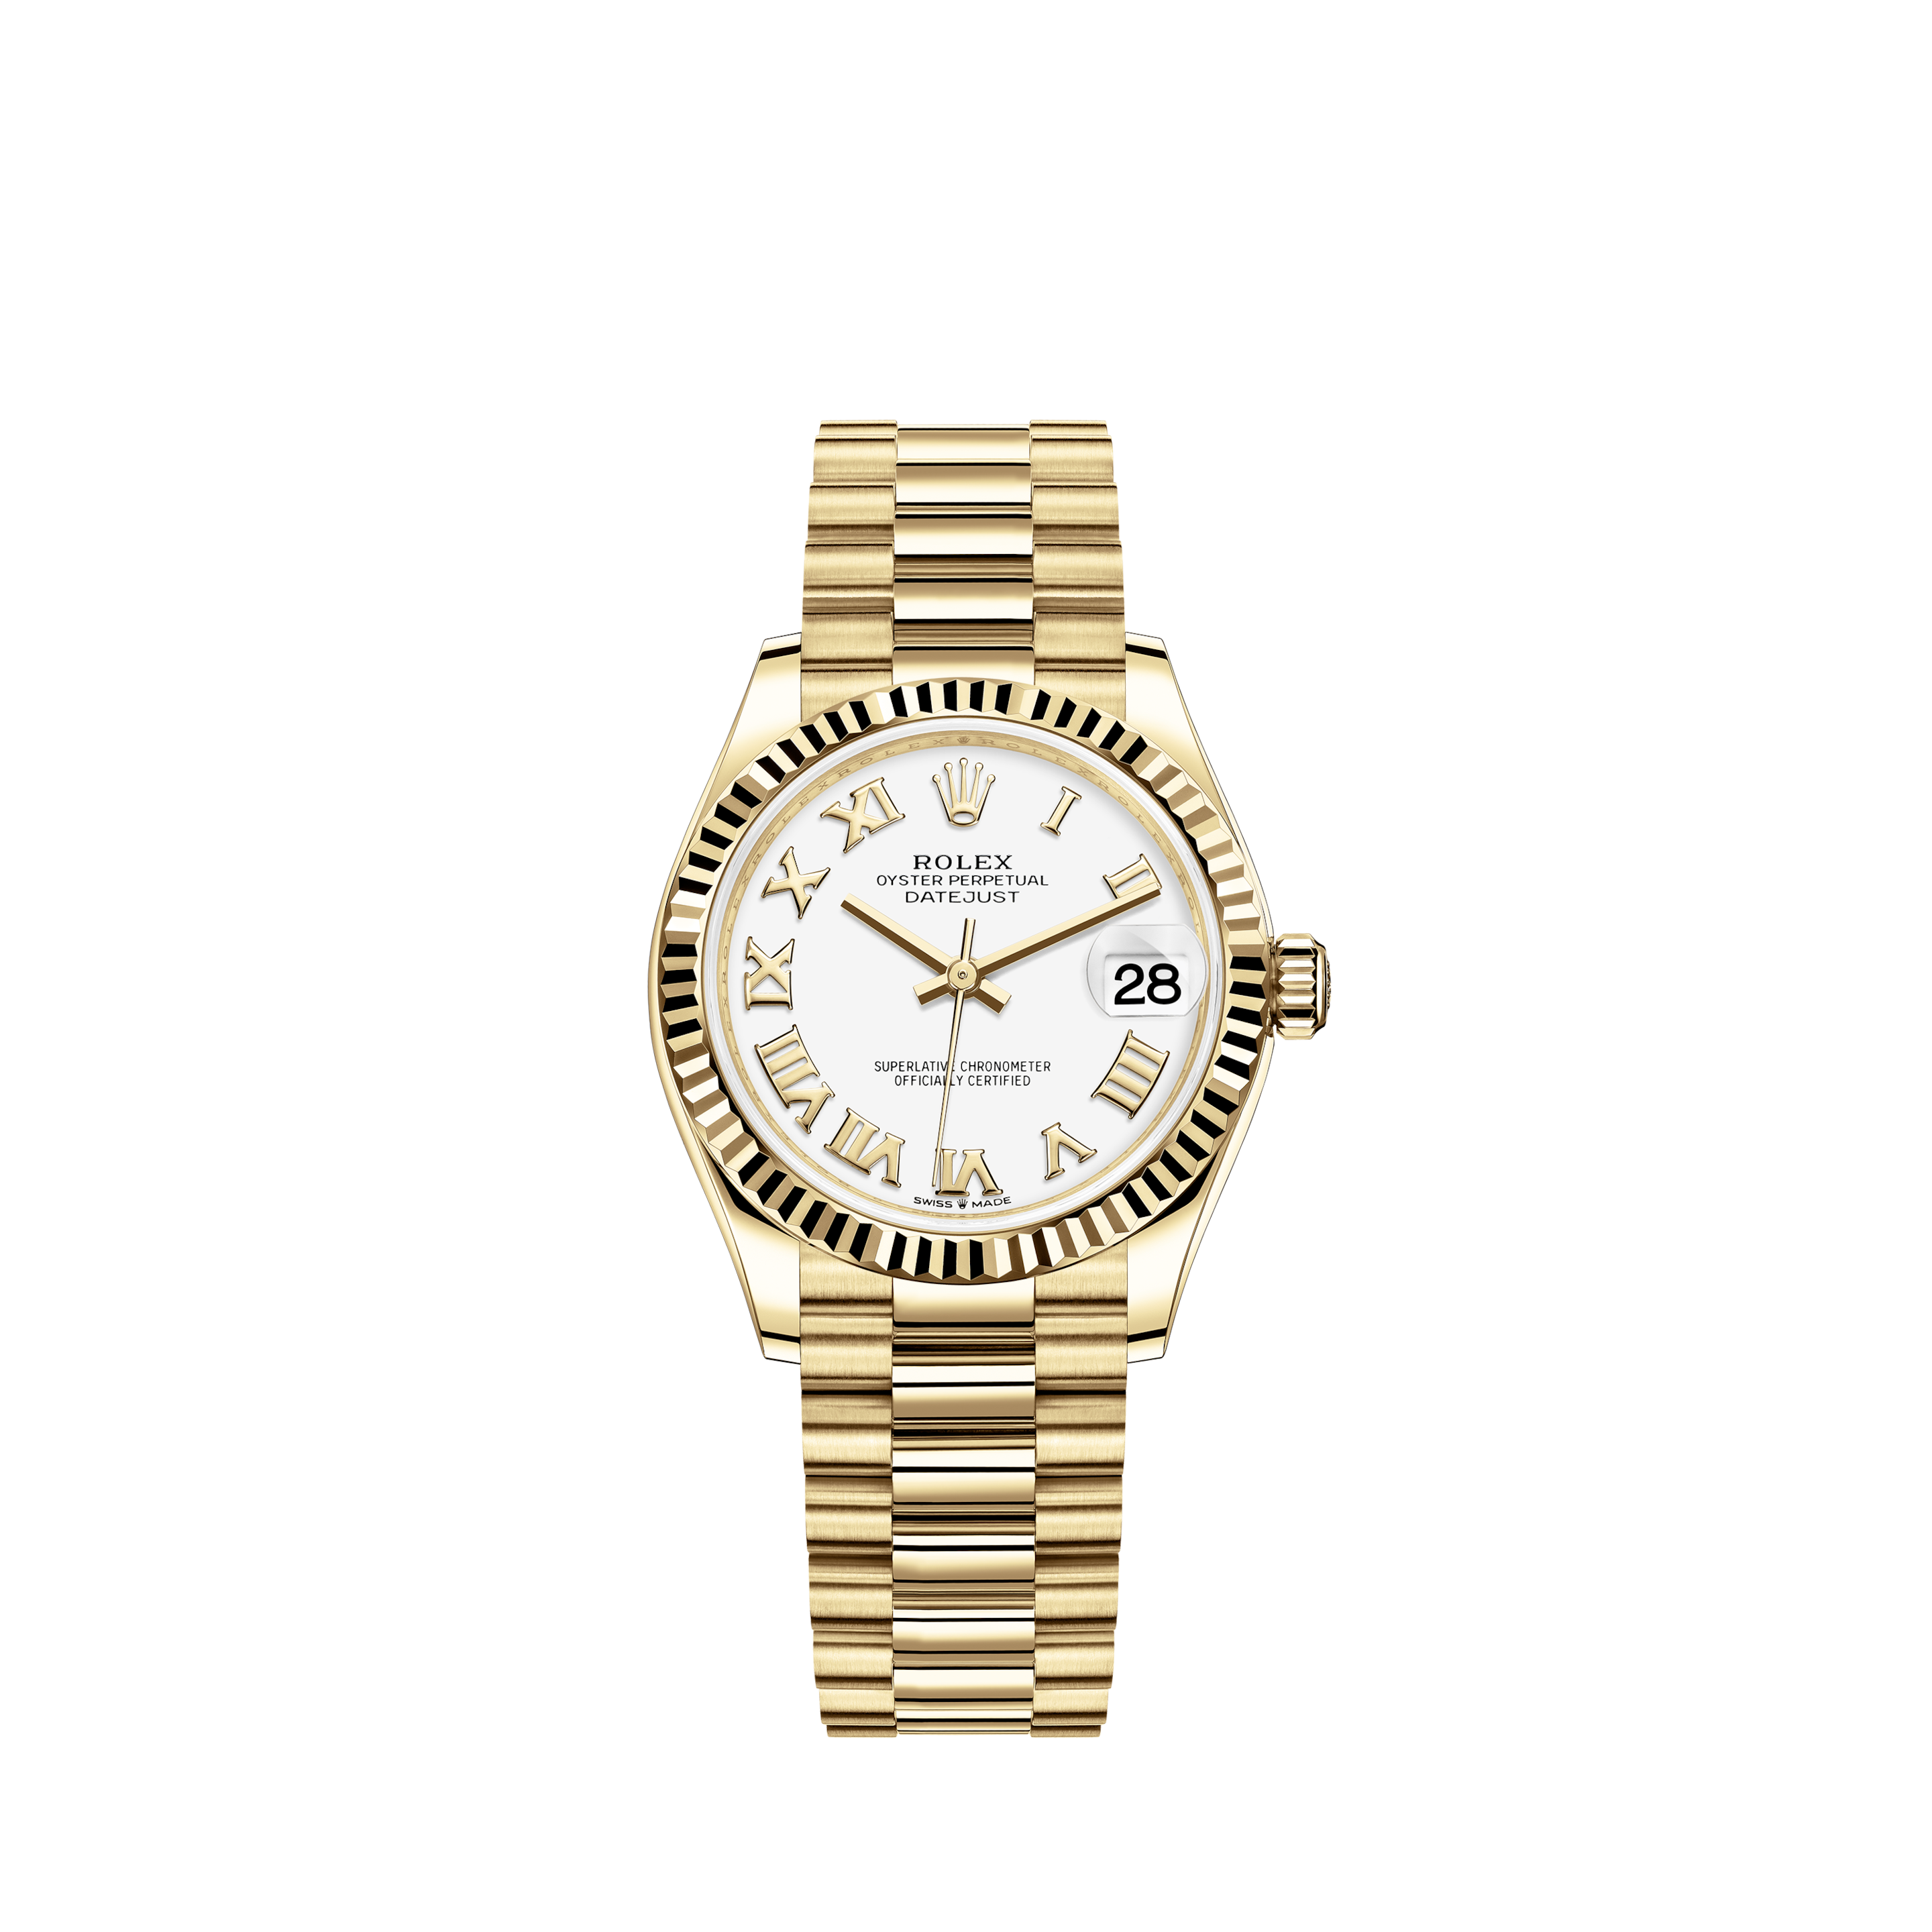 Rolex Datejust 31mm - Steel and Gold Yellow Gold - 46 Dia Bezel - Oyster 278383RBR CHIORolex Datejust 31mm - Steel and Gold Yellow Gold - 46 Dia Bezel - Oyster 278383RBR DKGDO